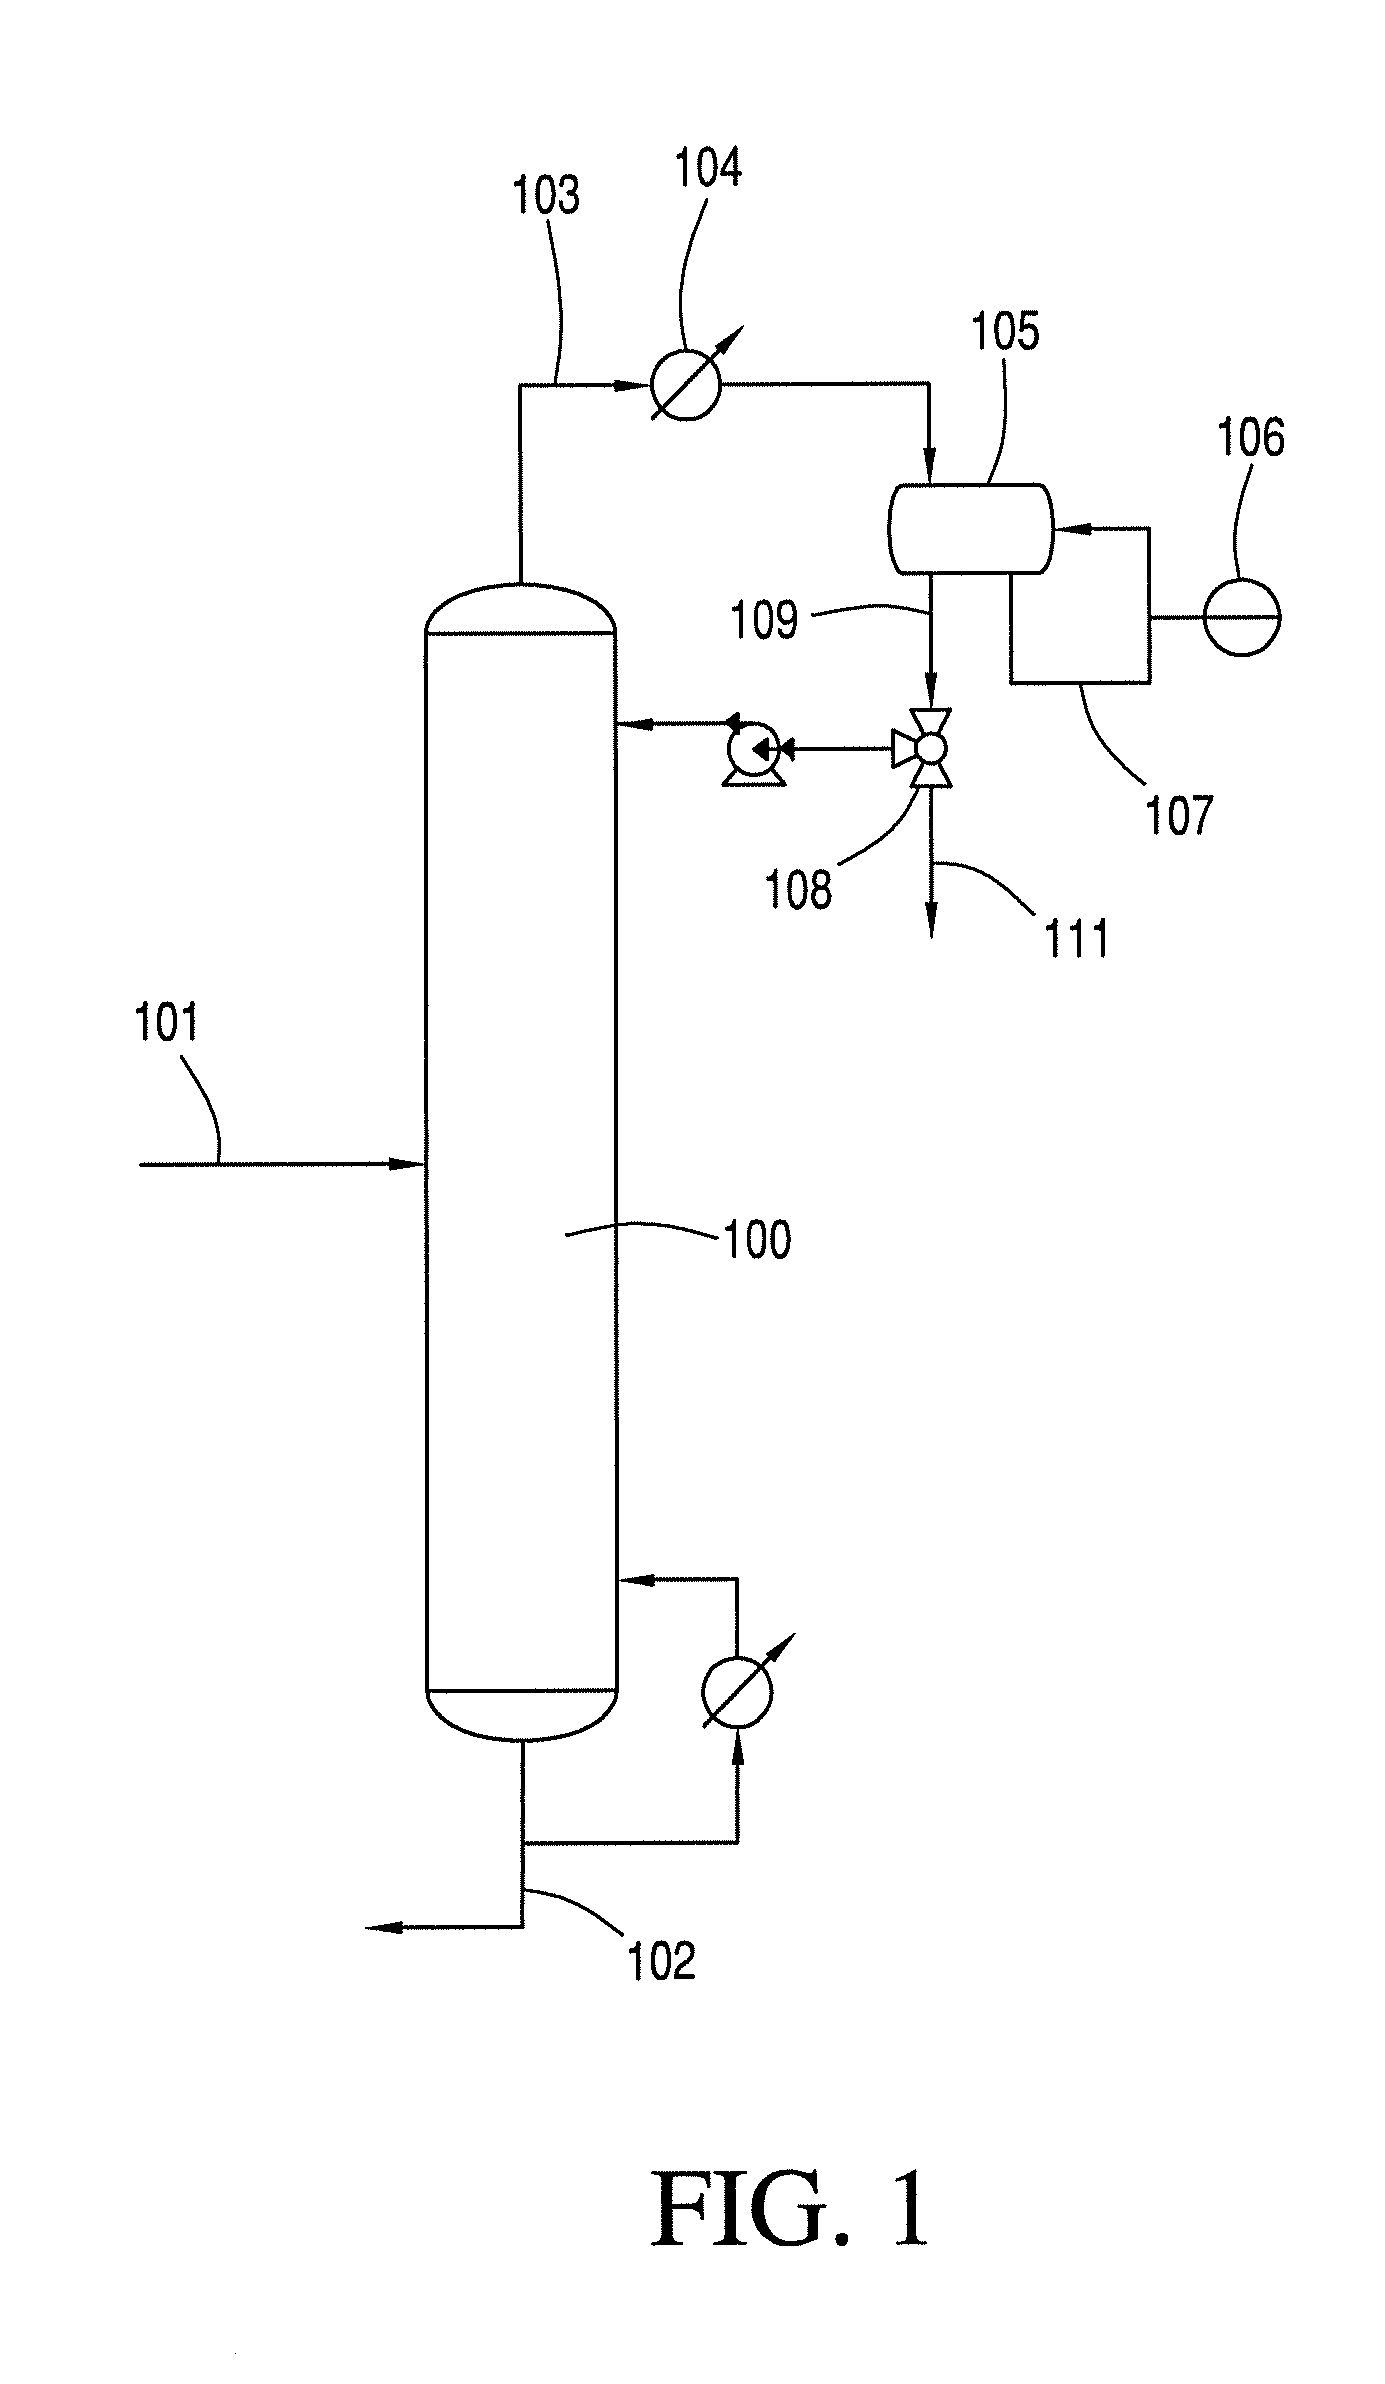 Process for Monitoring Separation of Ethanol Mixture